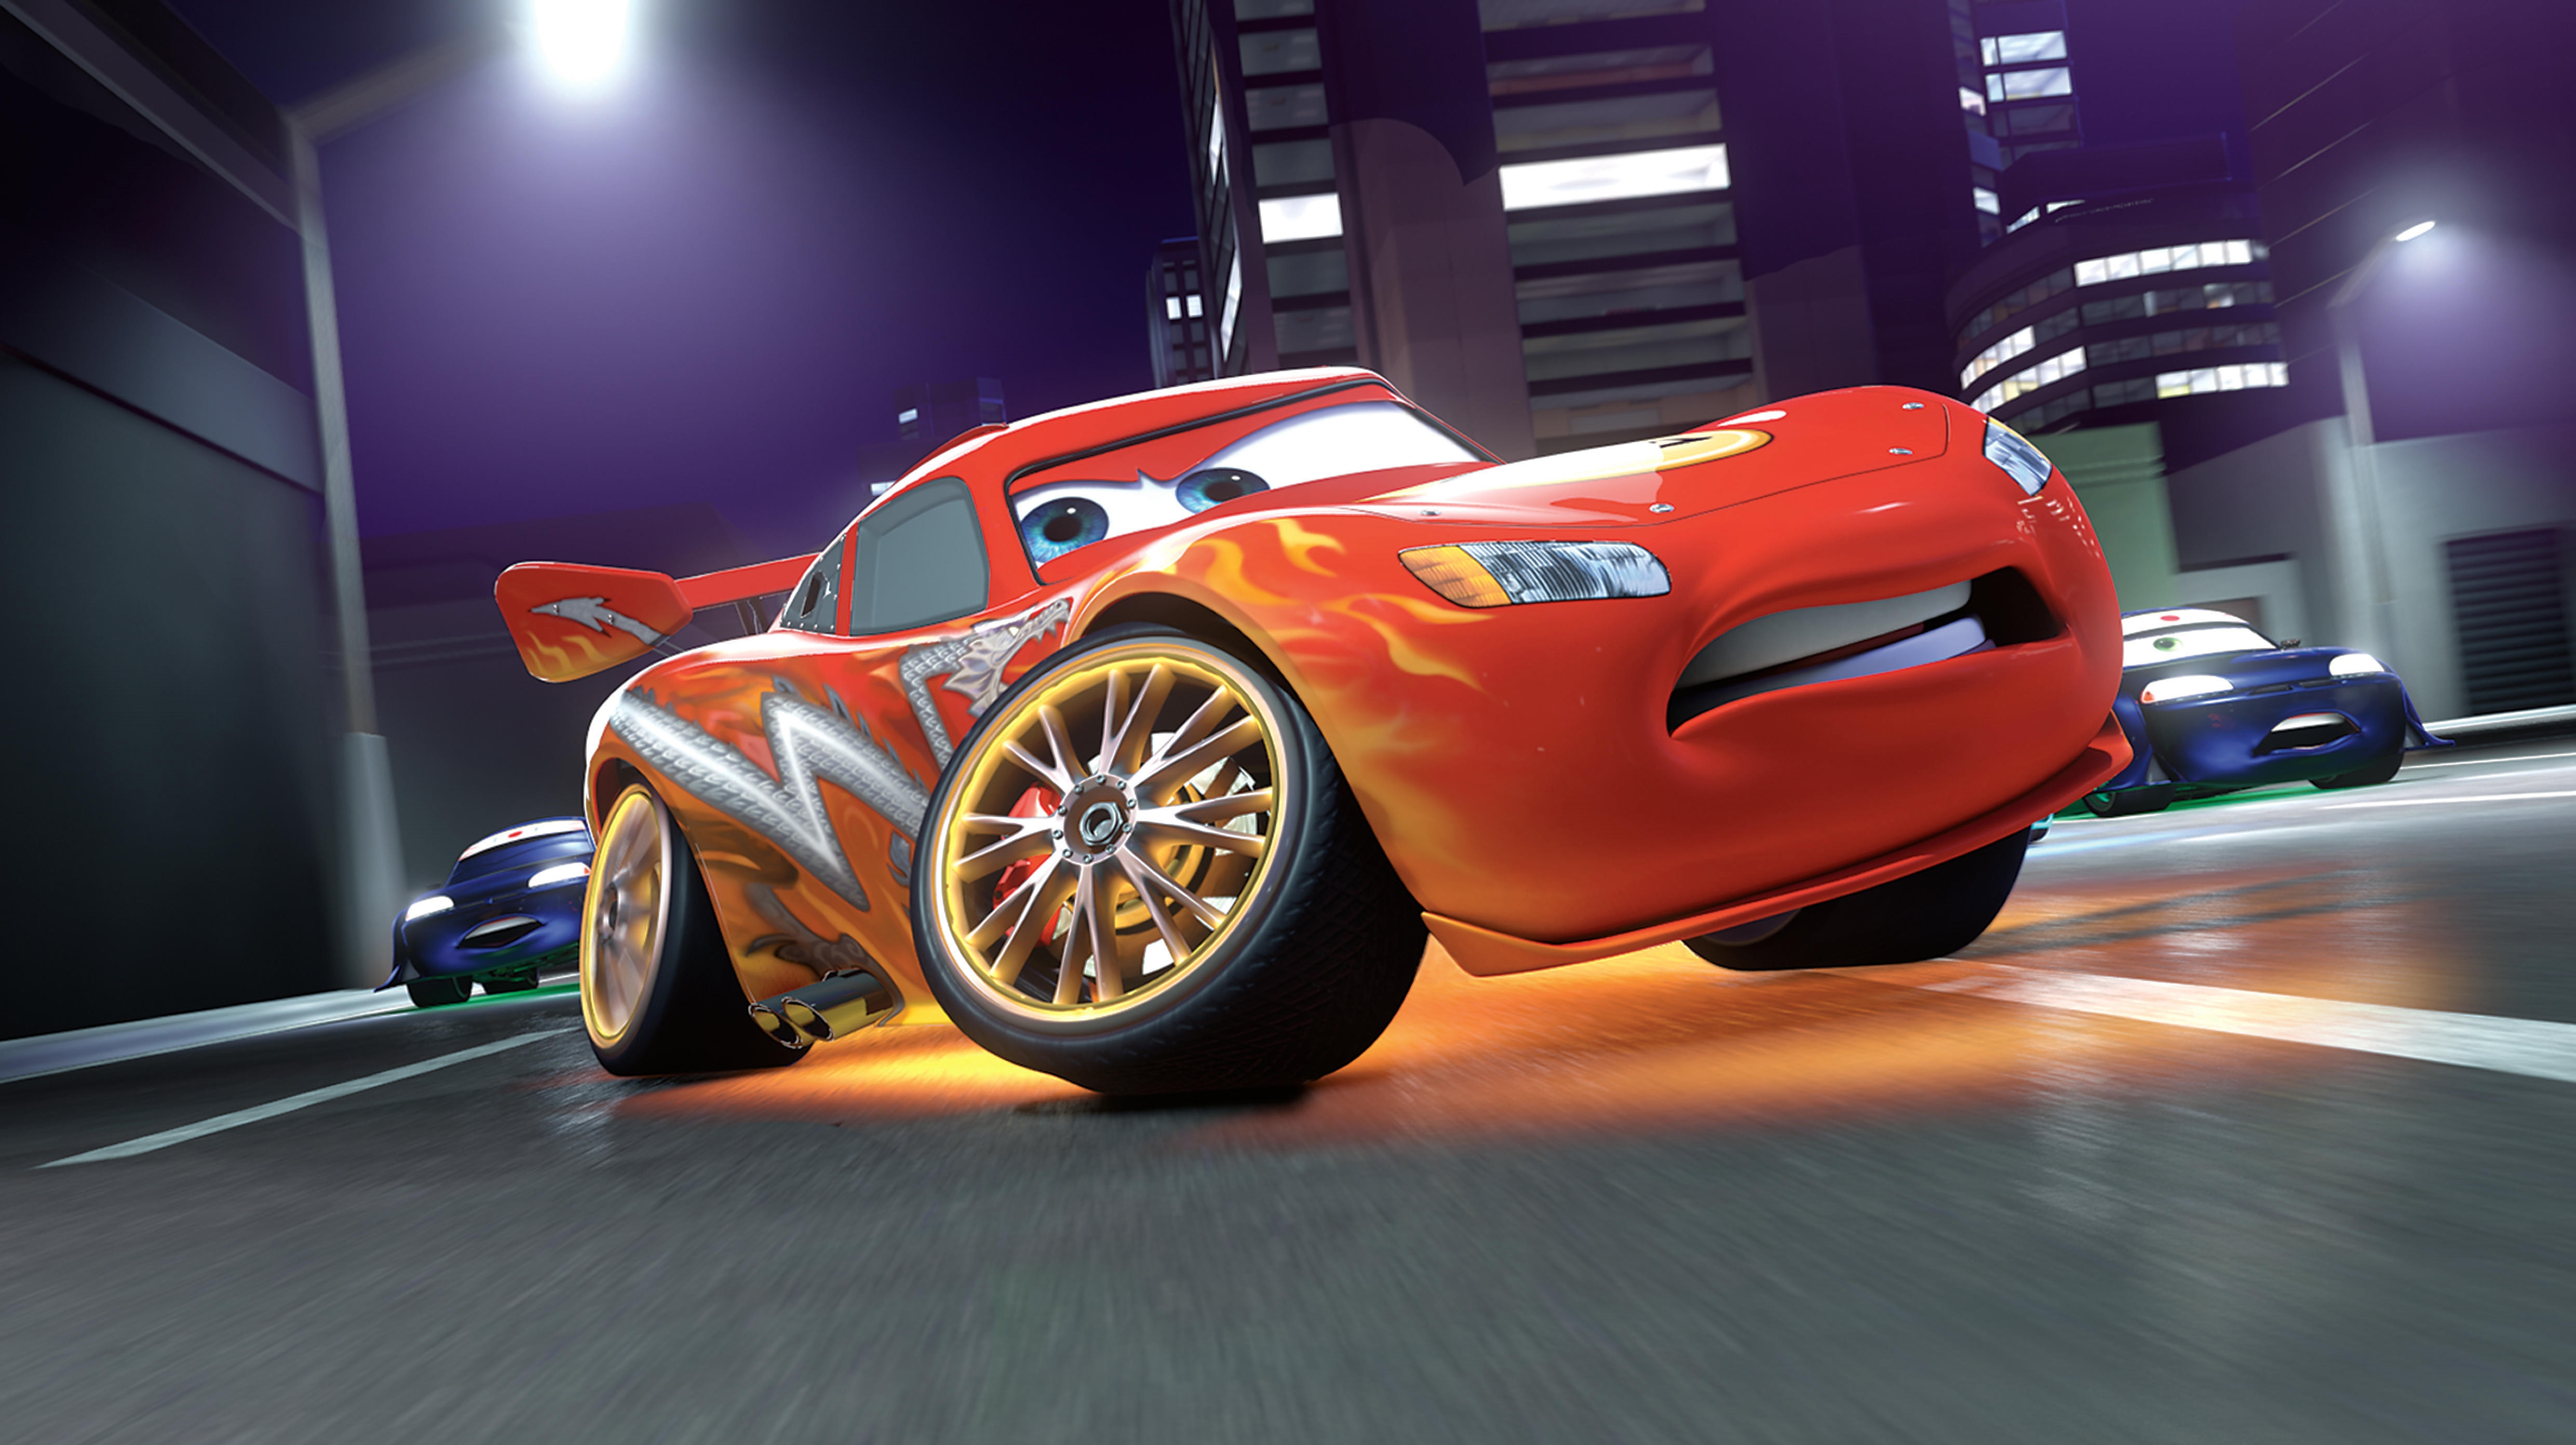 Disney Cars Hd Wallpapers 1080p Best Cars Wallpapers